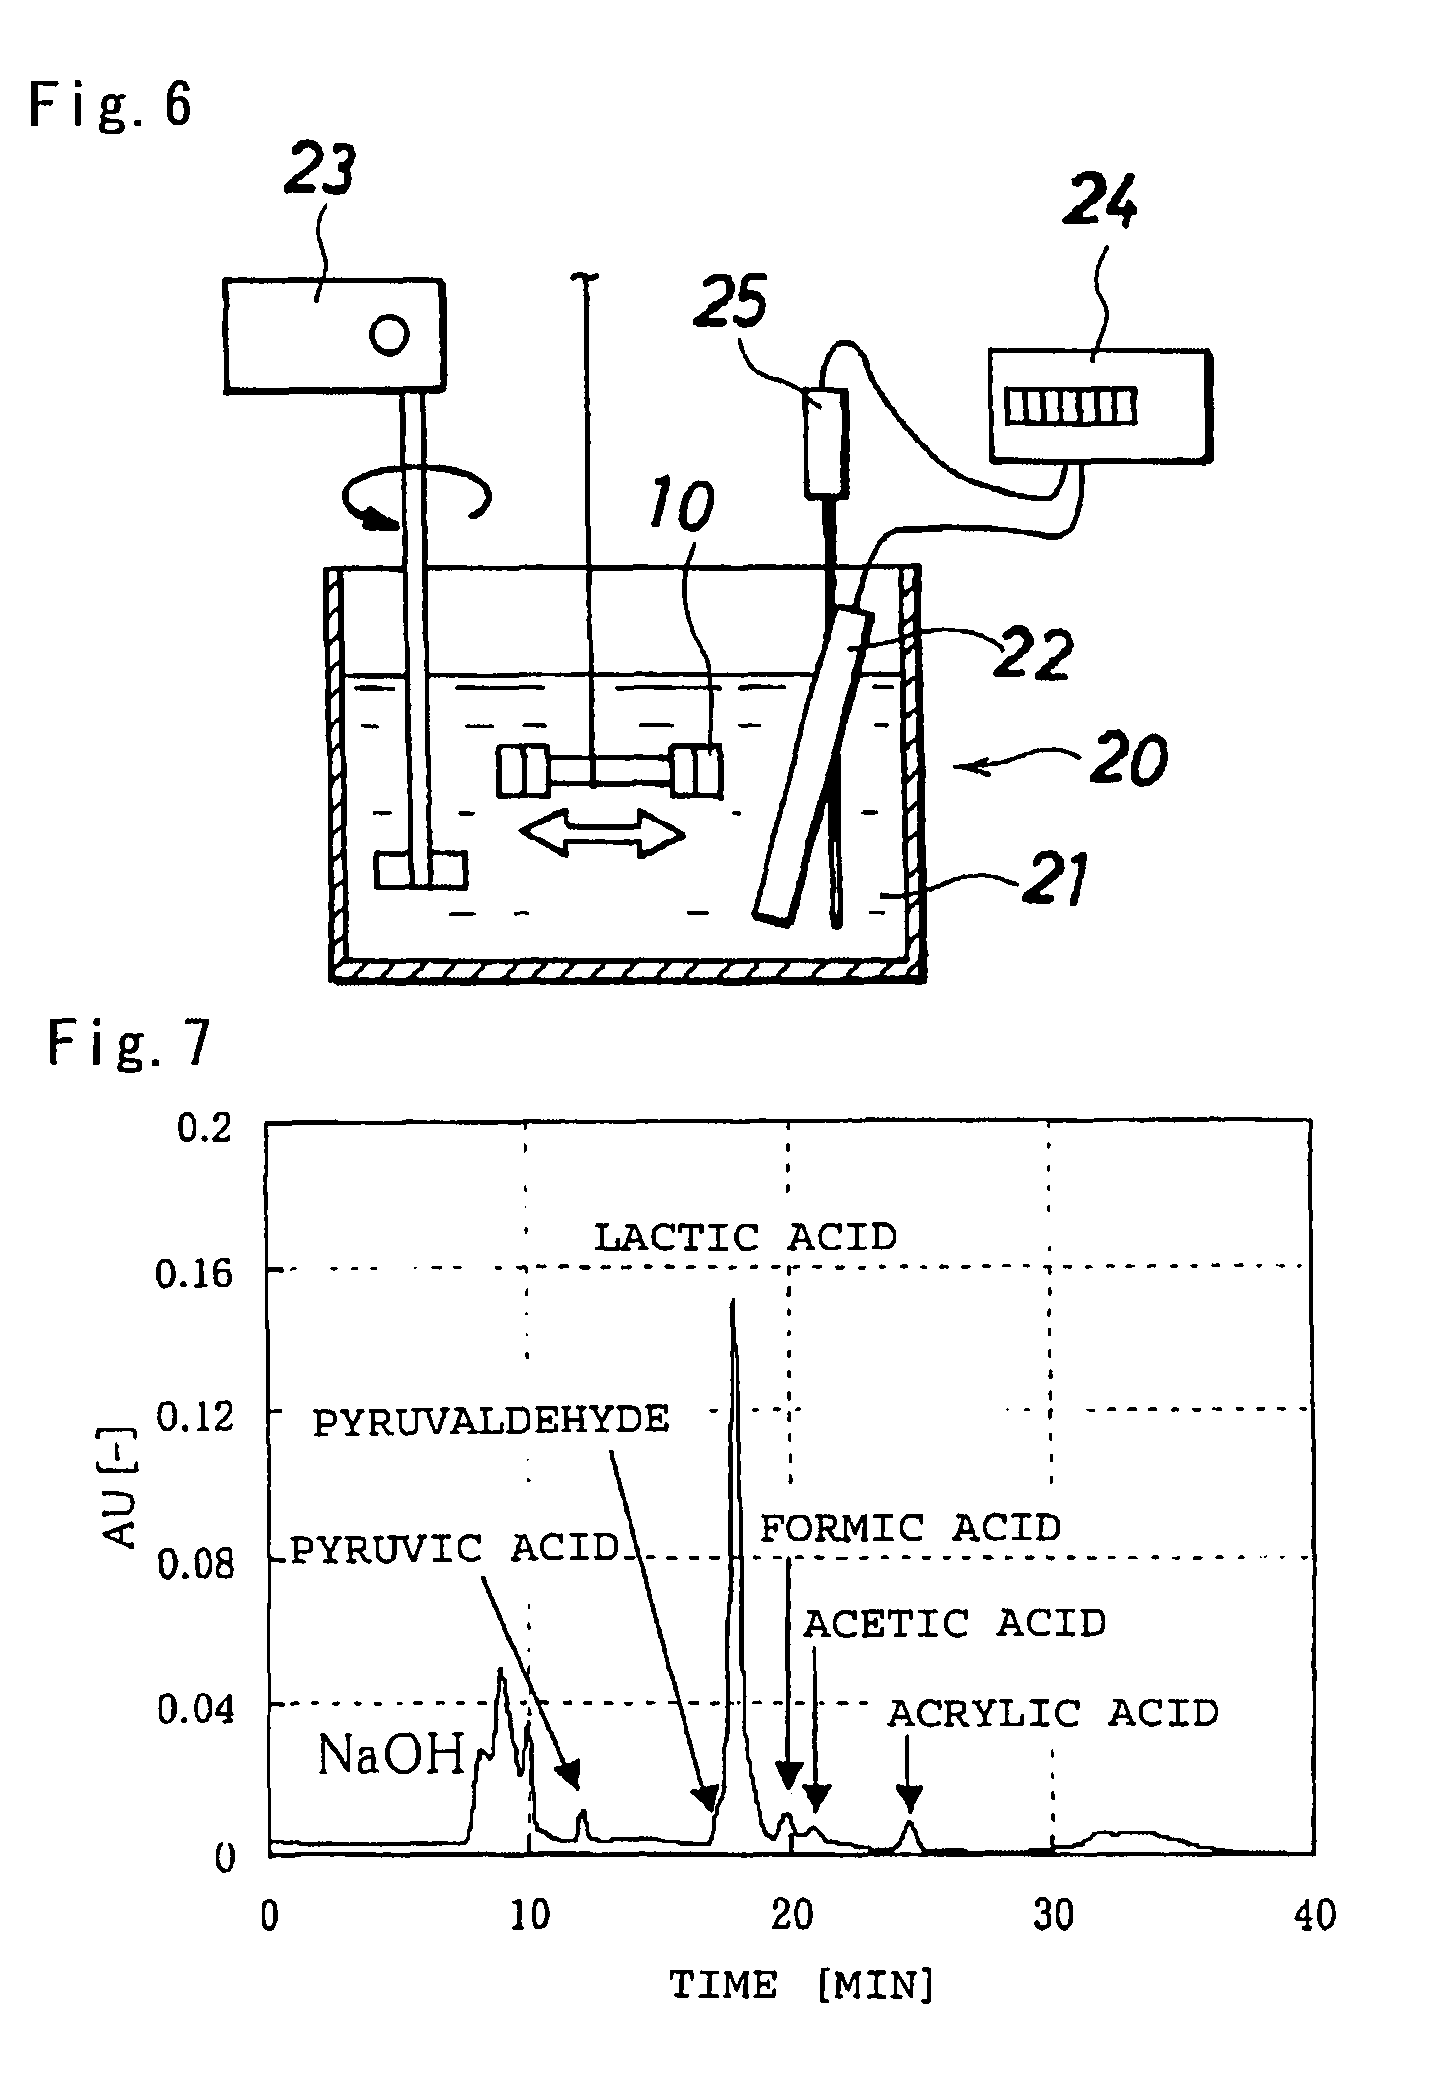 Process for production of lactic acid and equipment for the production